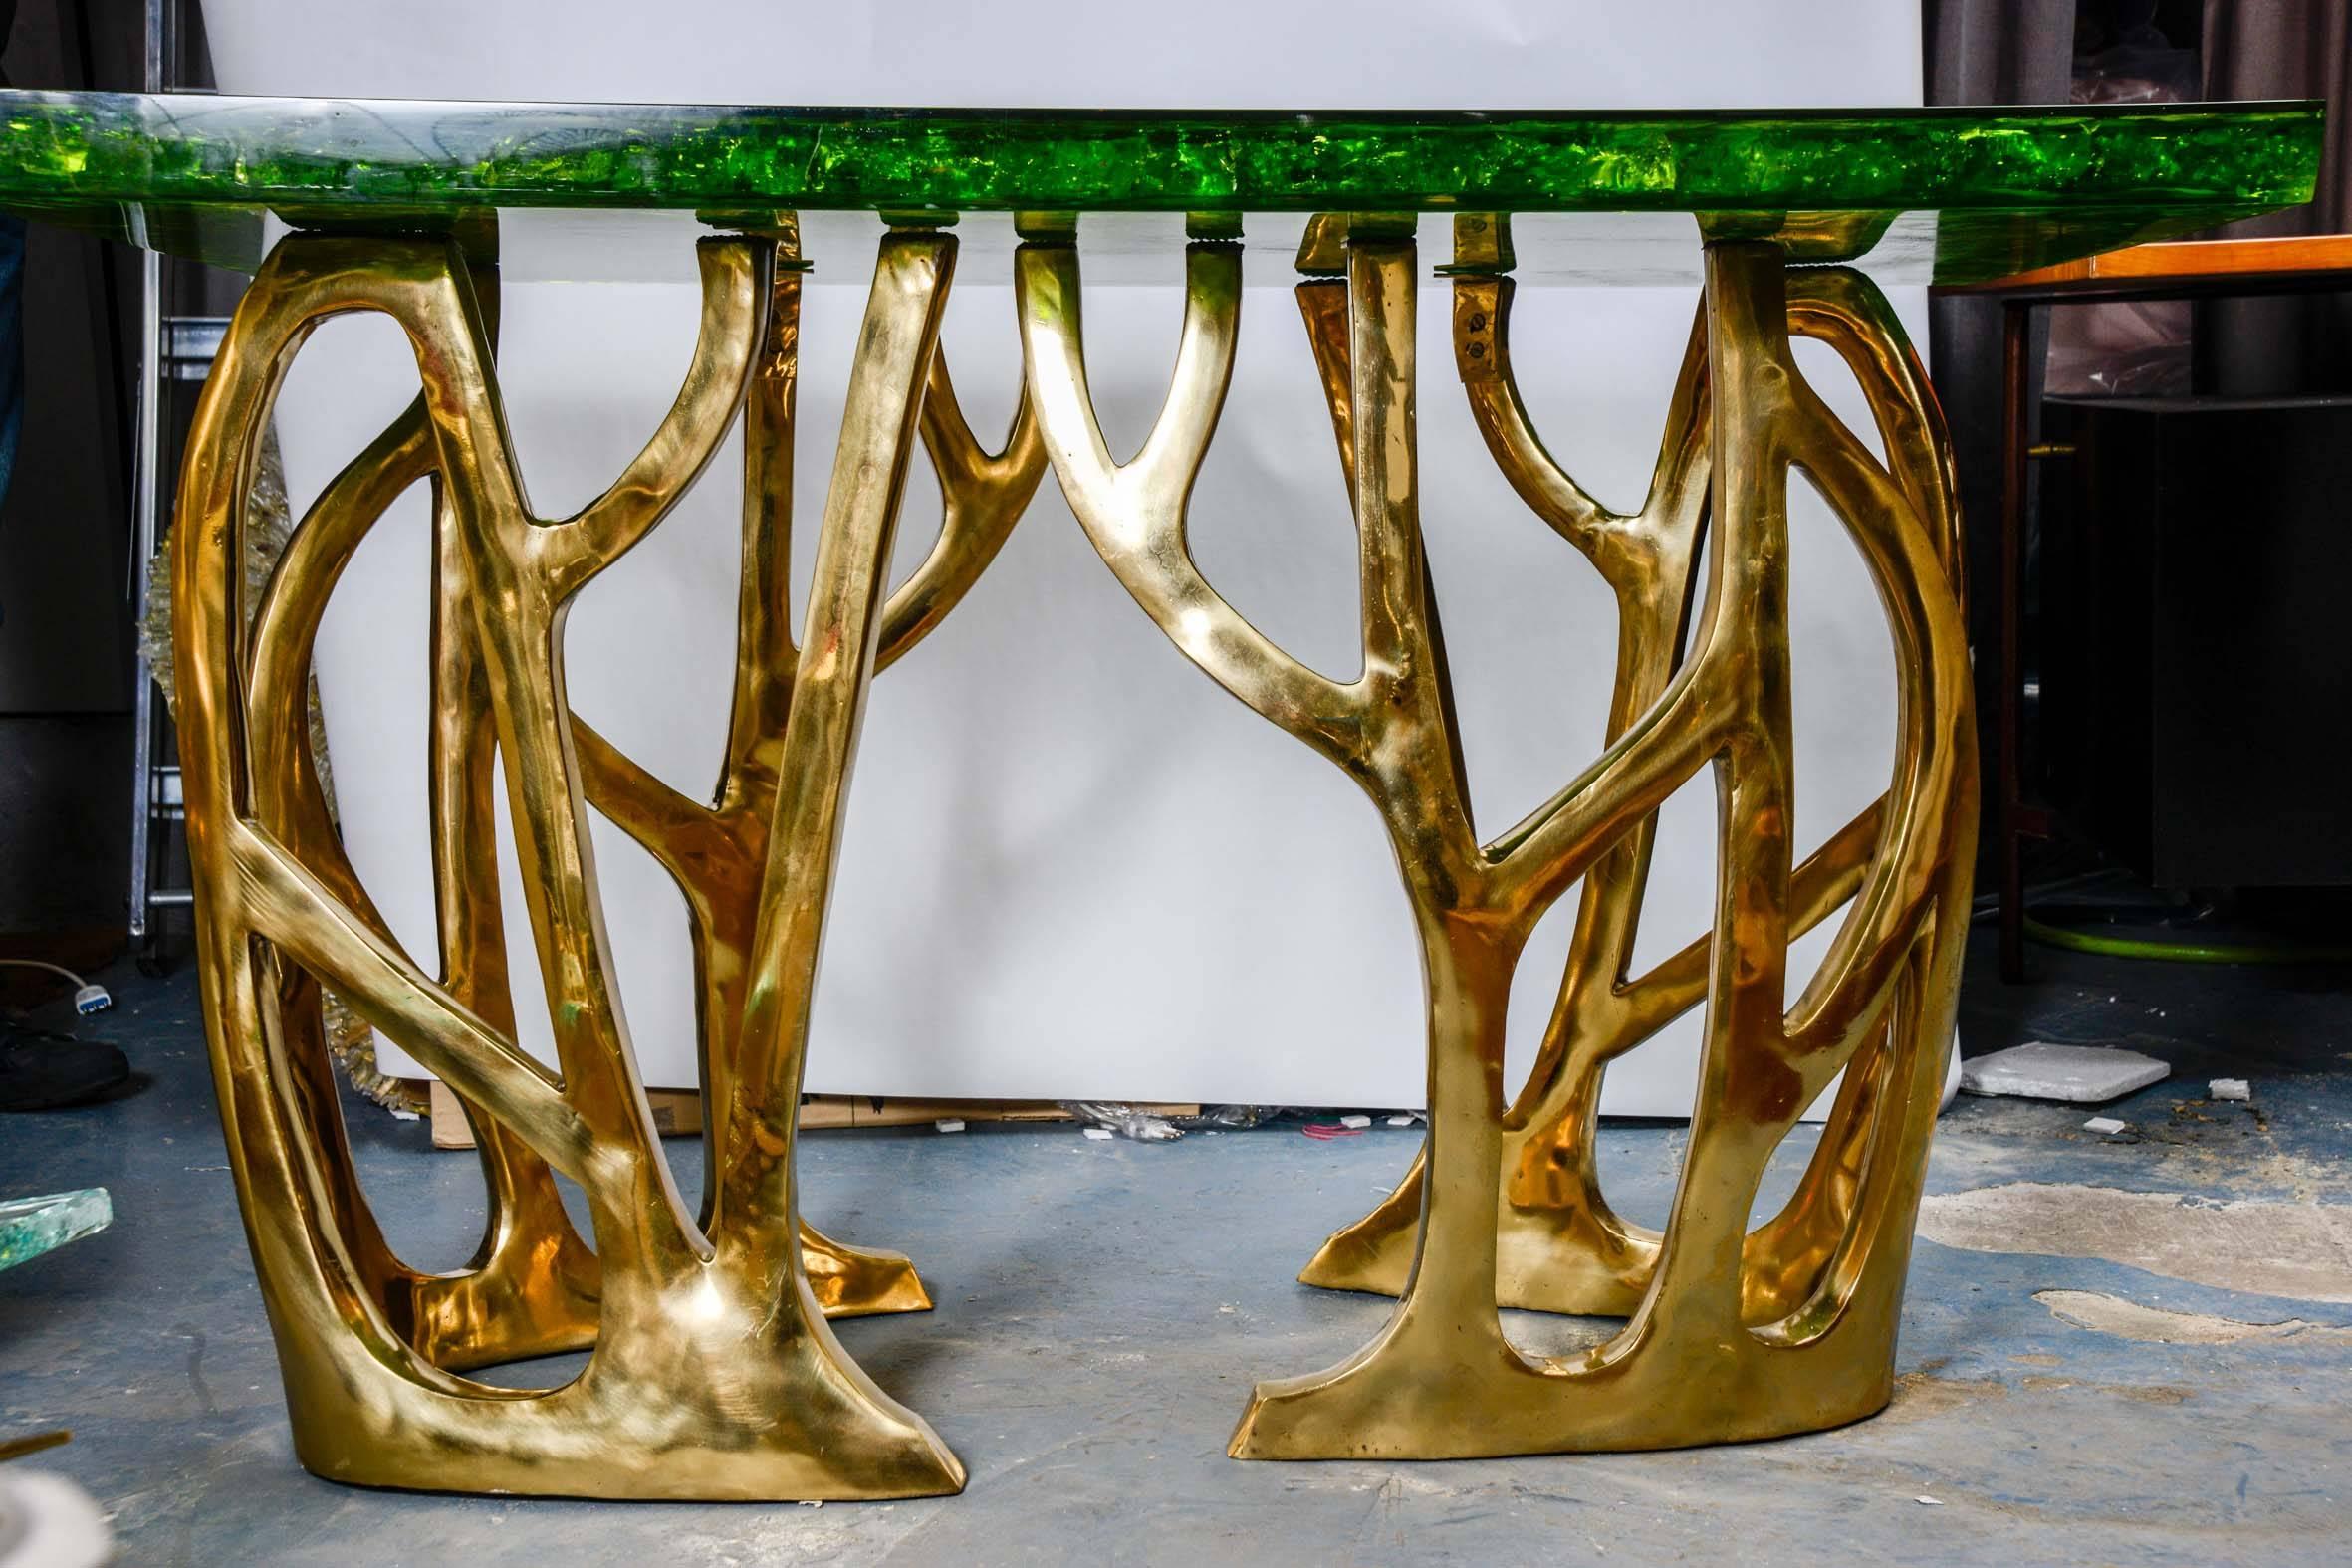 Fantastic console by Franco Gavagni for Régis Royant gallery.
Top can be made on order.
Different dimensions and colors.